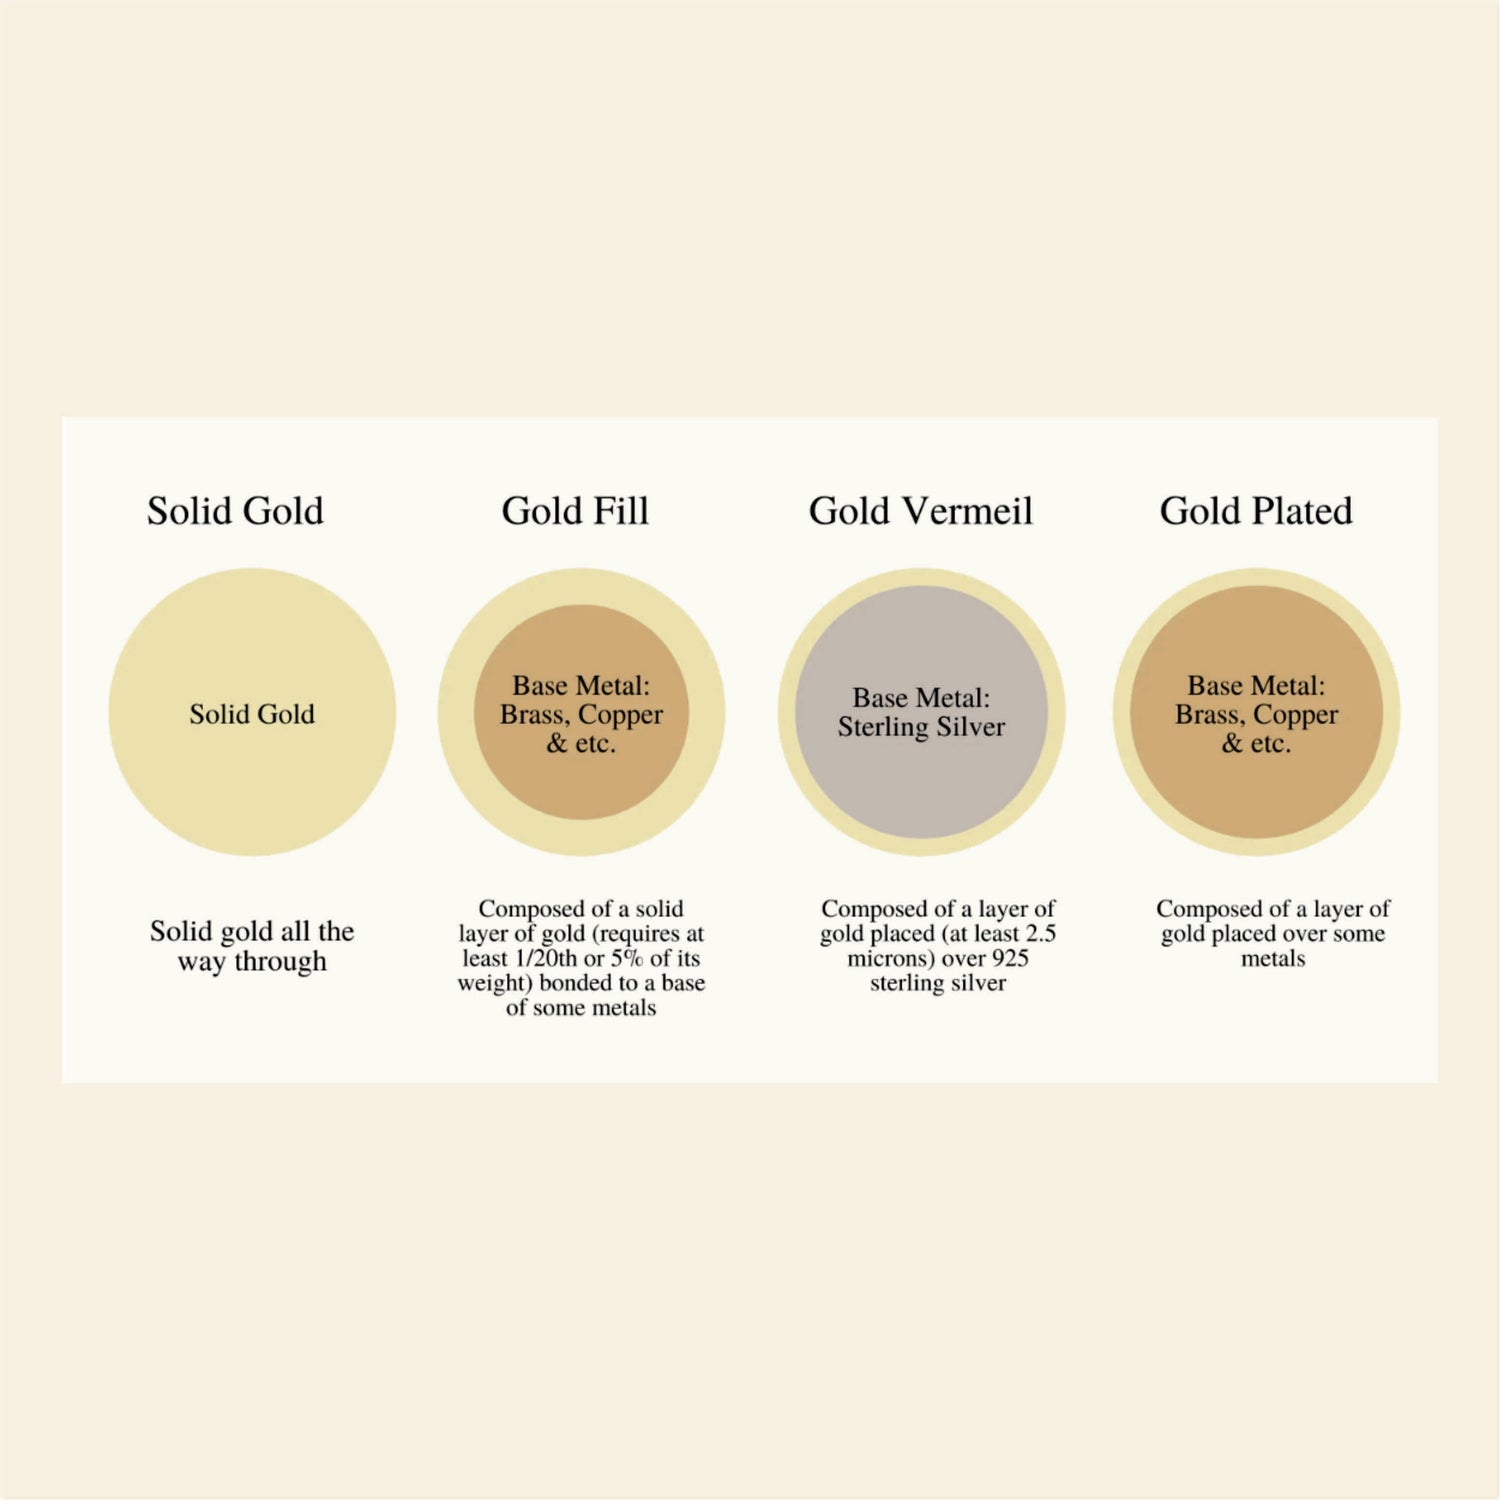 Different types of Gold